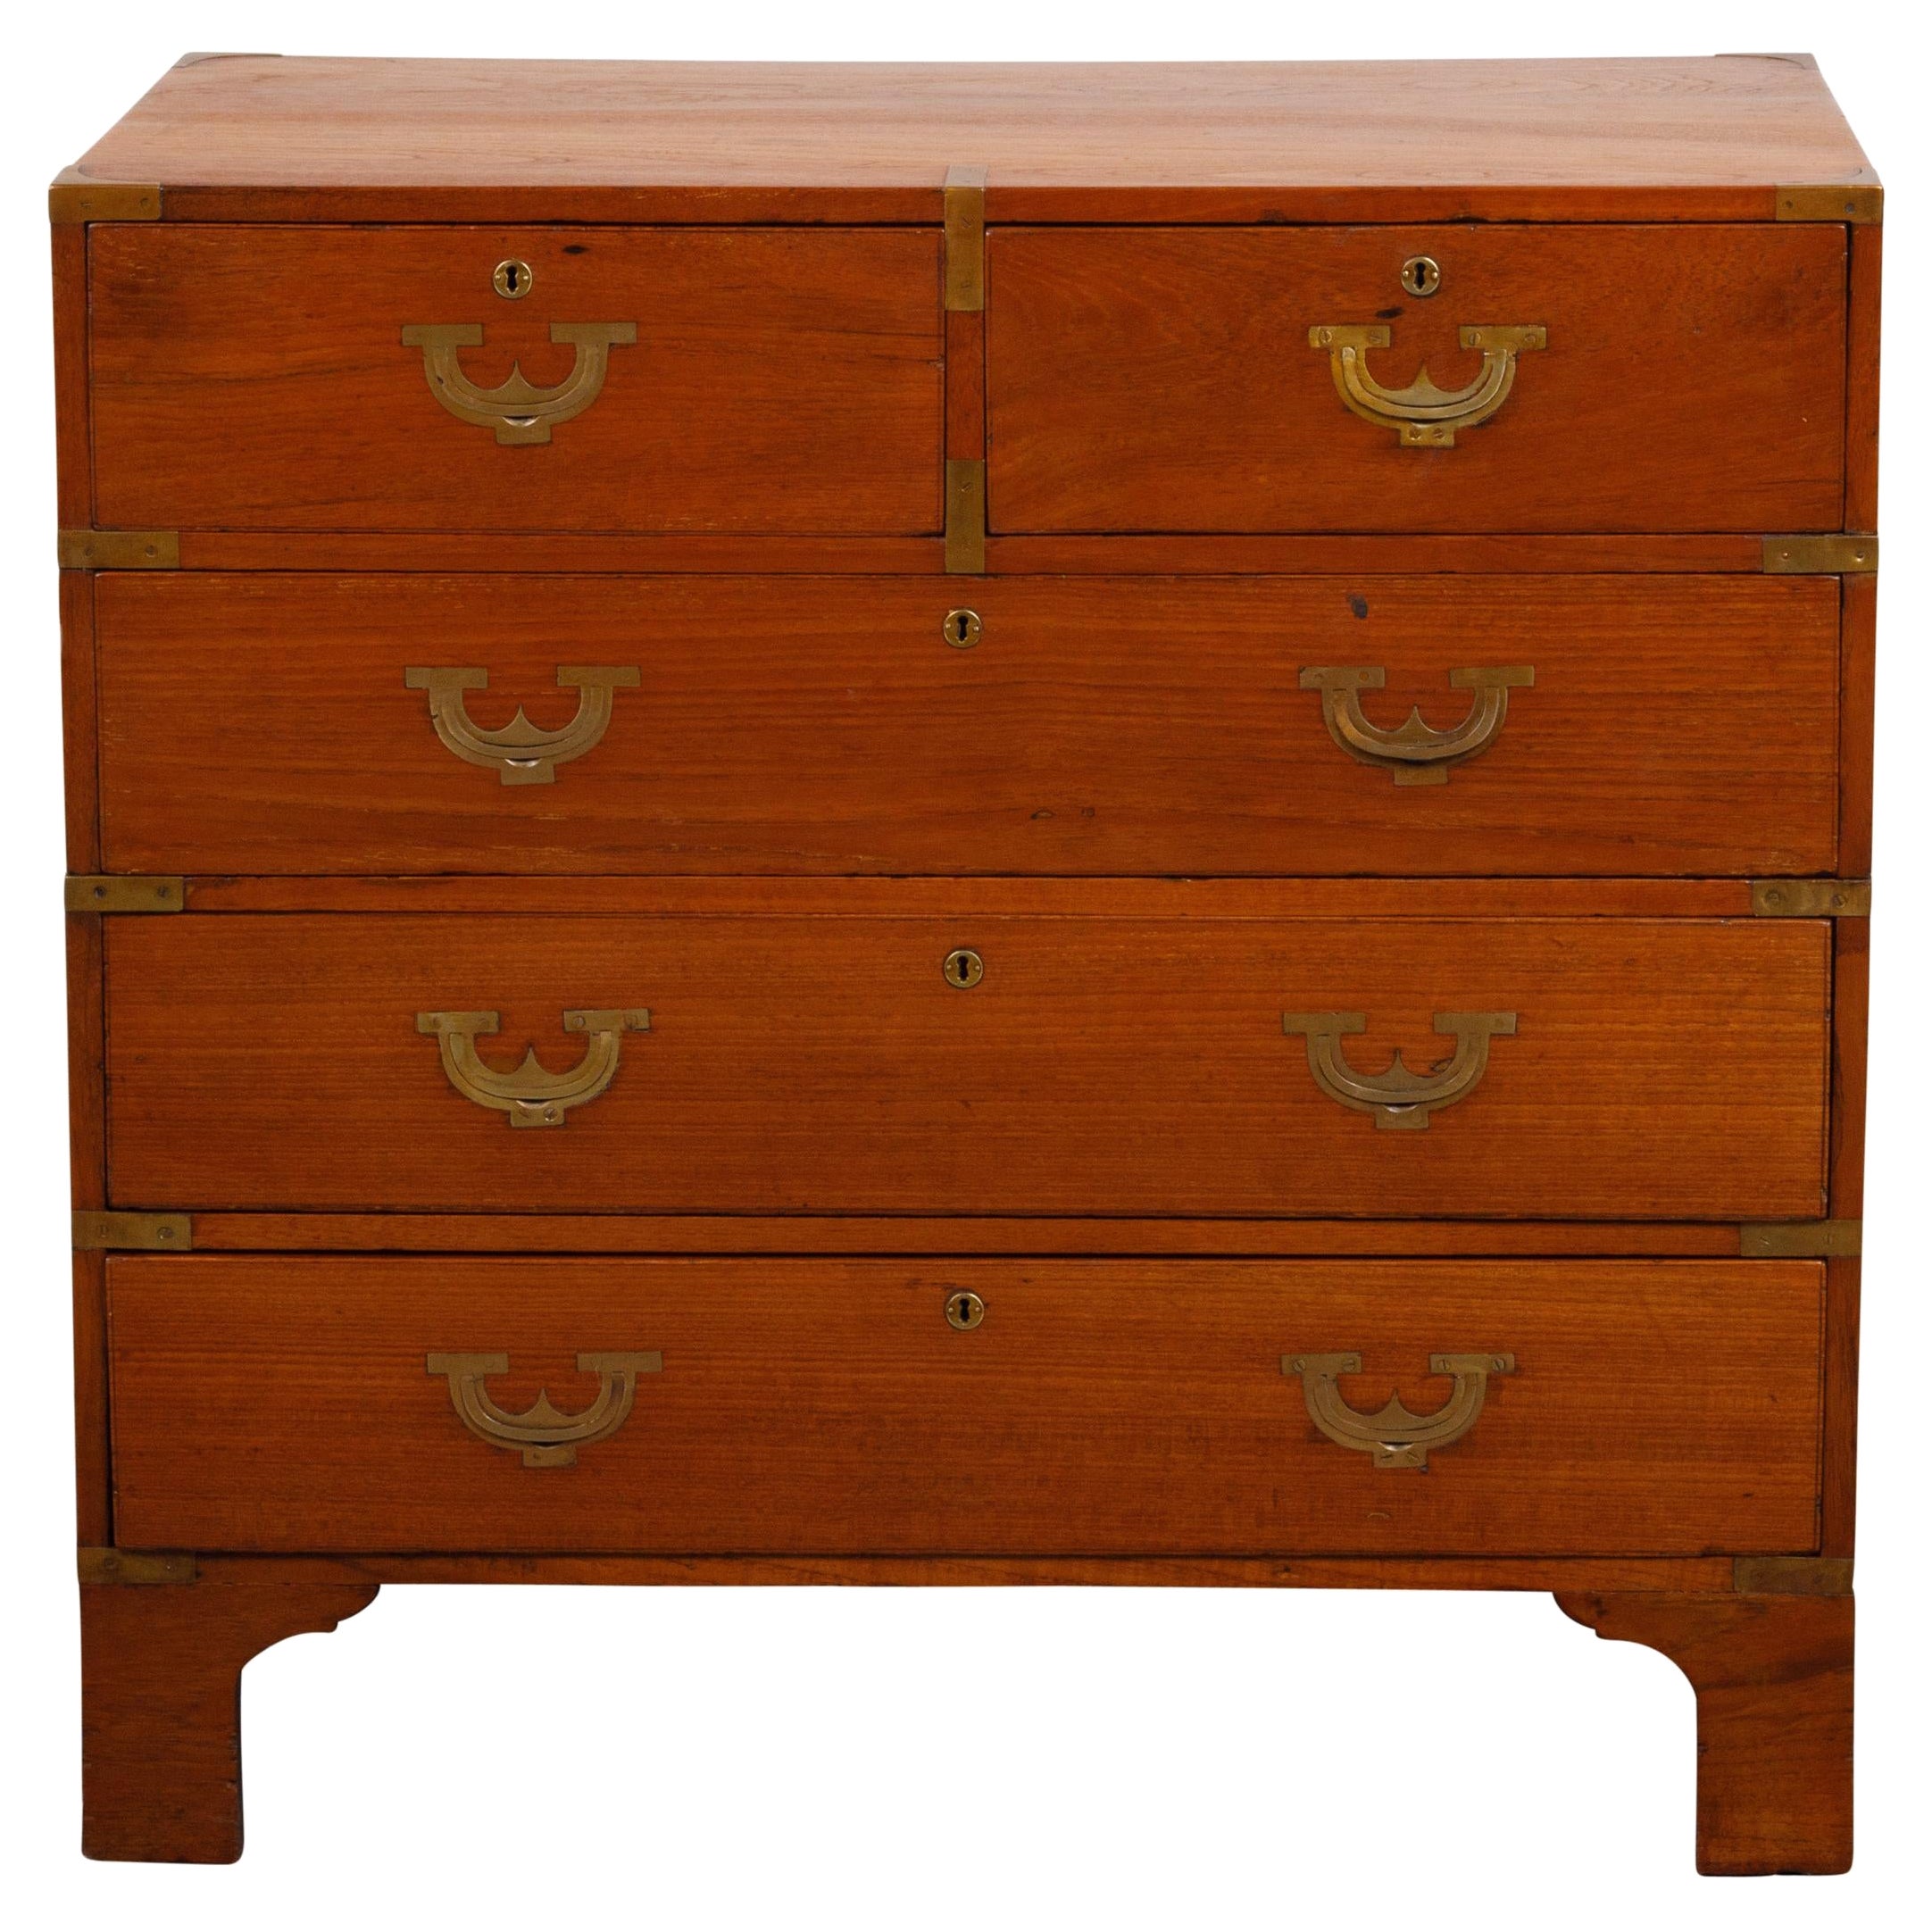 English 19th Century Teak Campaign Chest with Five Drawers and Brass Hardware For Sale